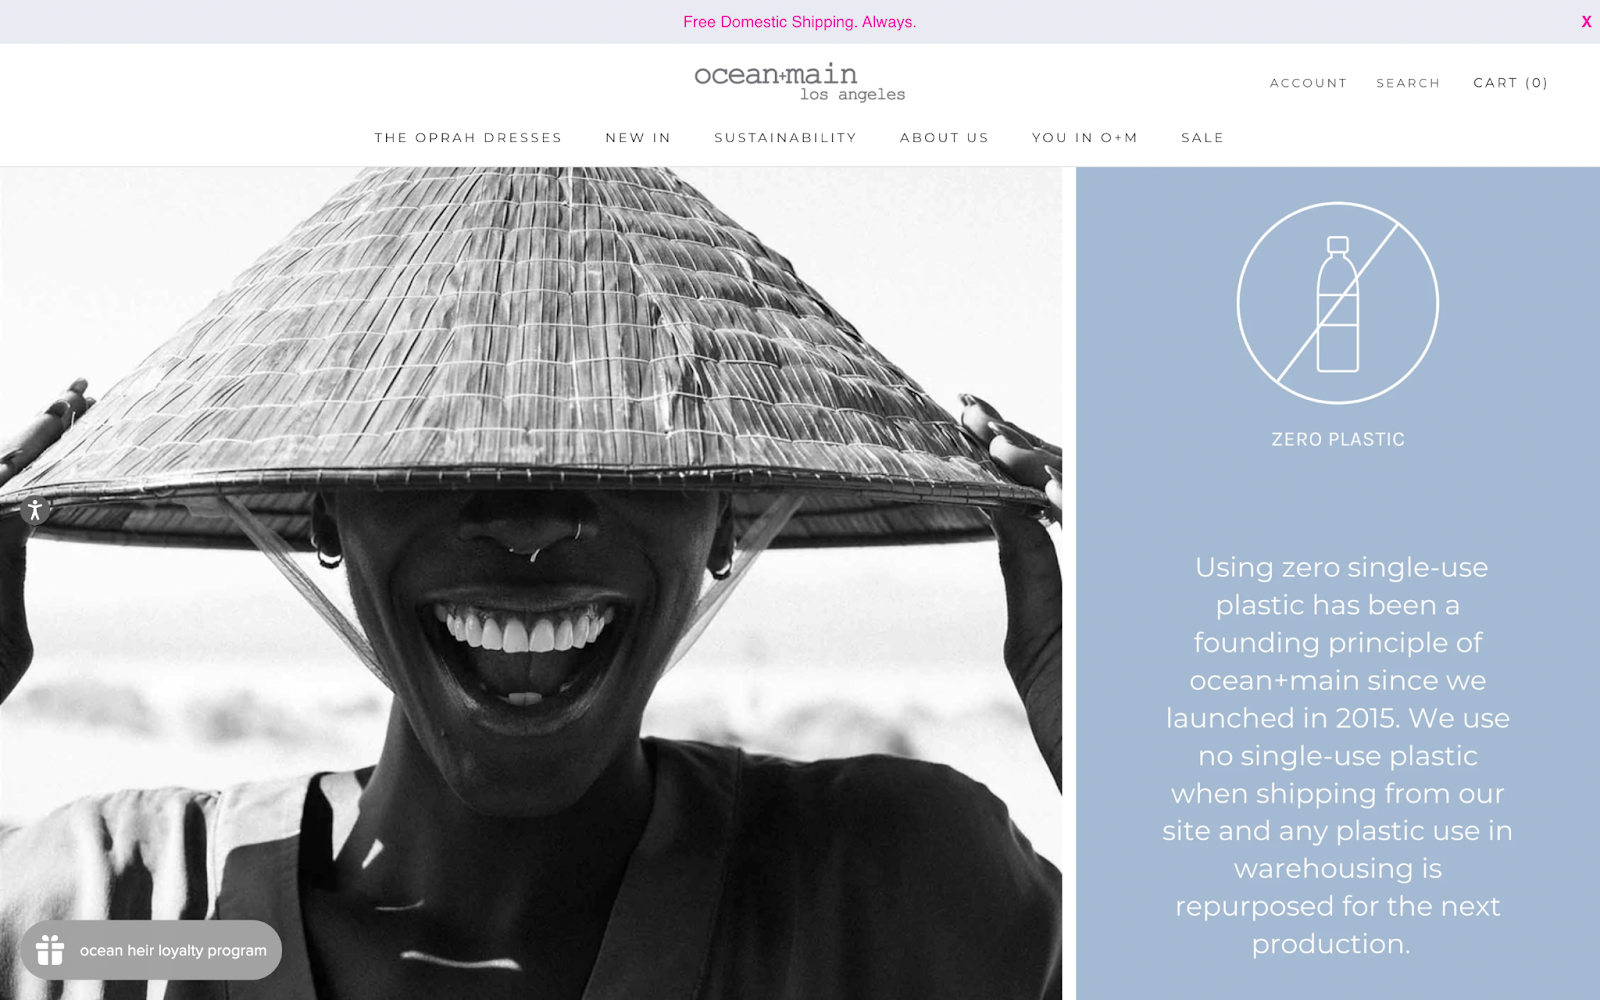 Sustainable brands–A screenshot of Ocean+main’s sustainability page with an image of a person wearing a traditional Asian hat. Next to the image is Ocean+main’s Zero Plastic policy: Using zero single-use plastic has been a founding principle of Ocean+main since we launched in 2015. We use no single-use plastic when shipping from our site any plastic use in warehousing is repurposed for the next production. 